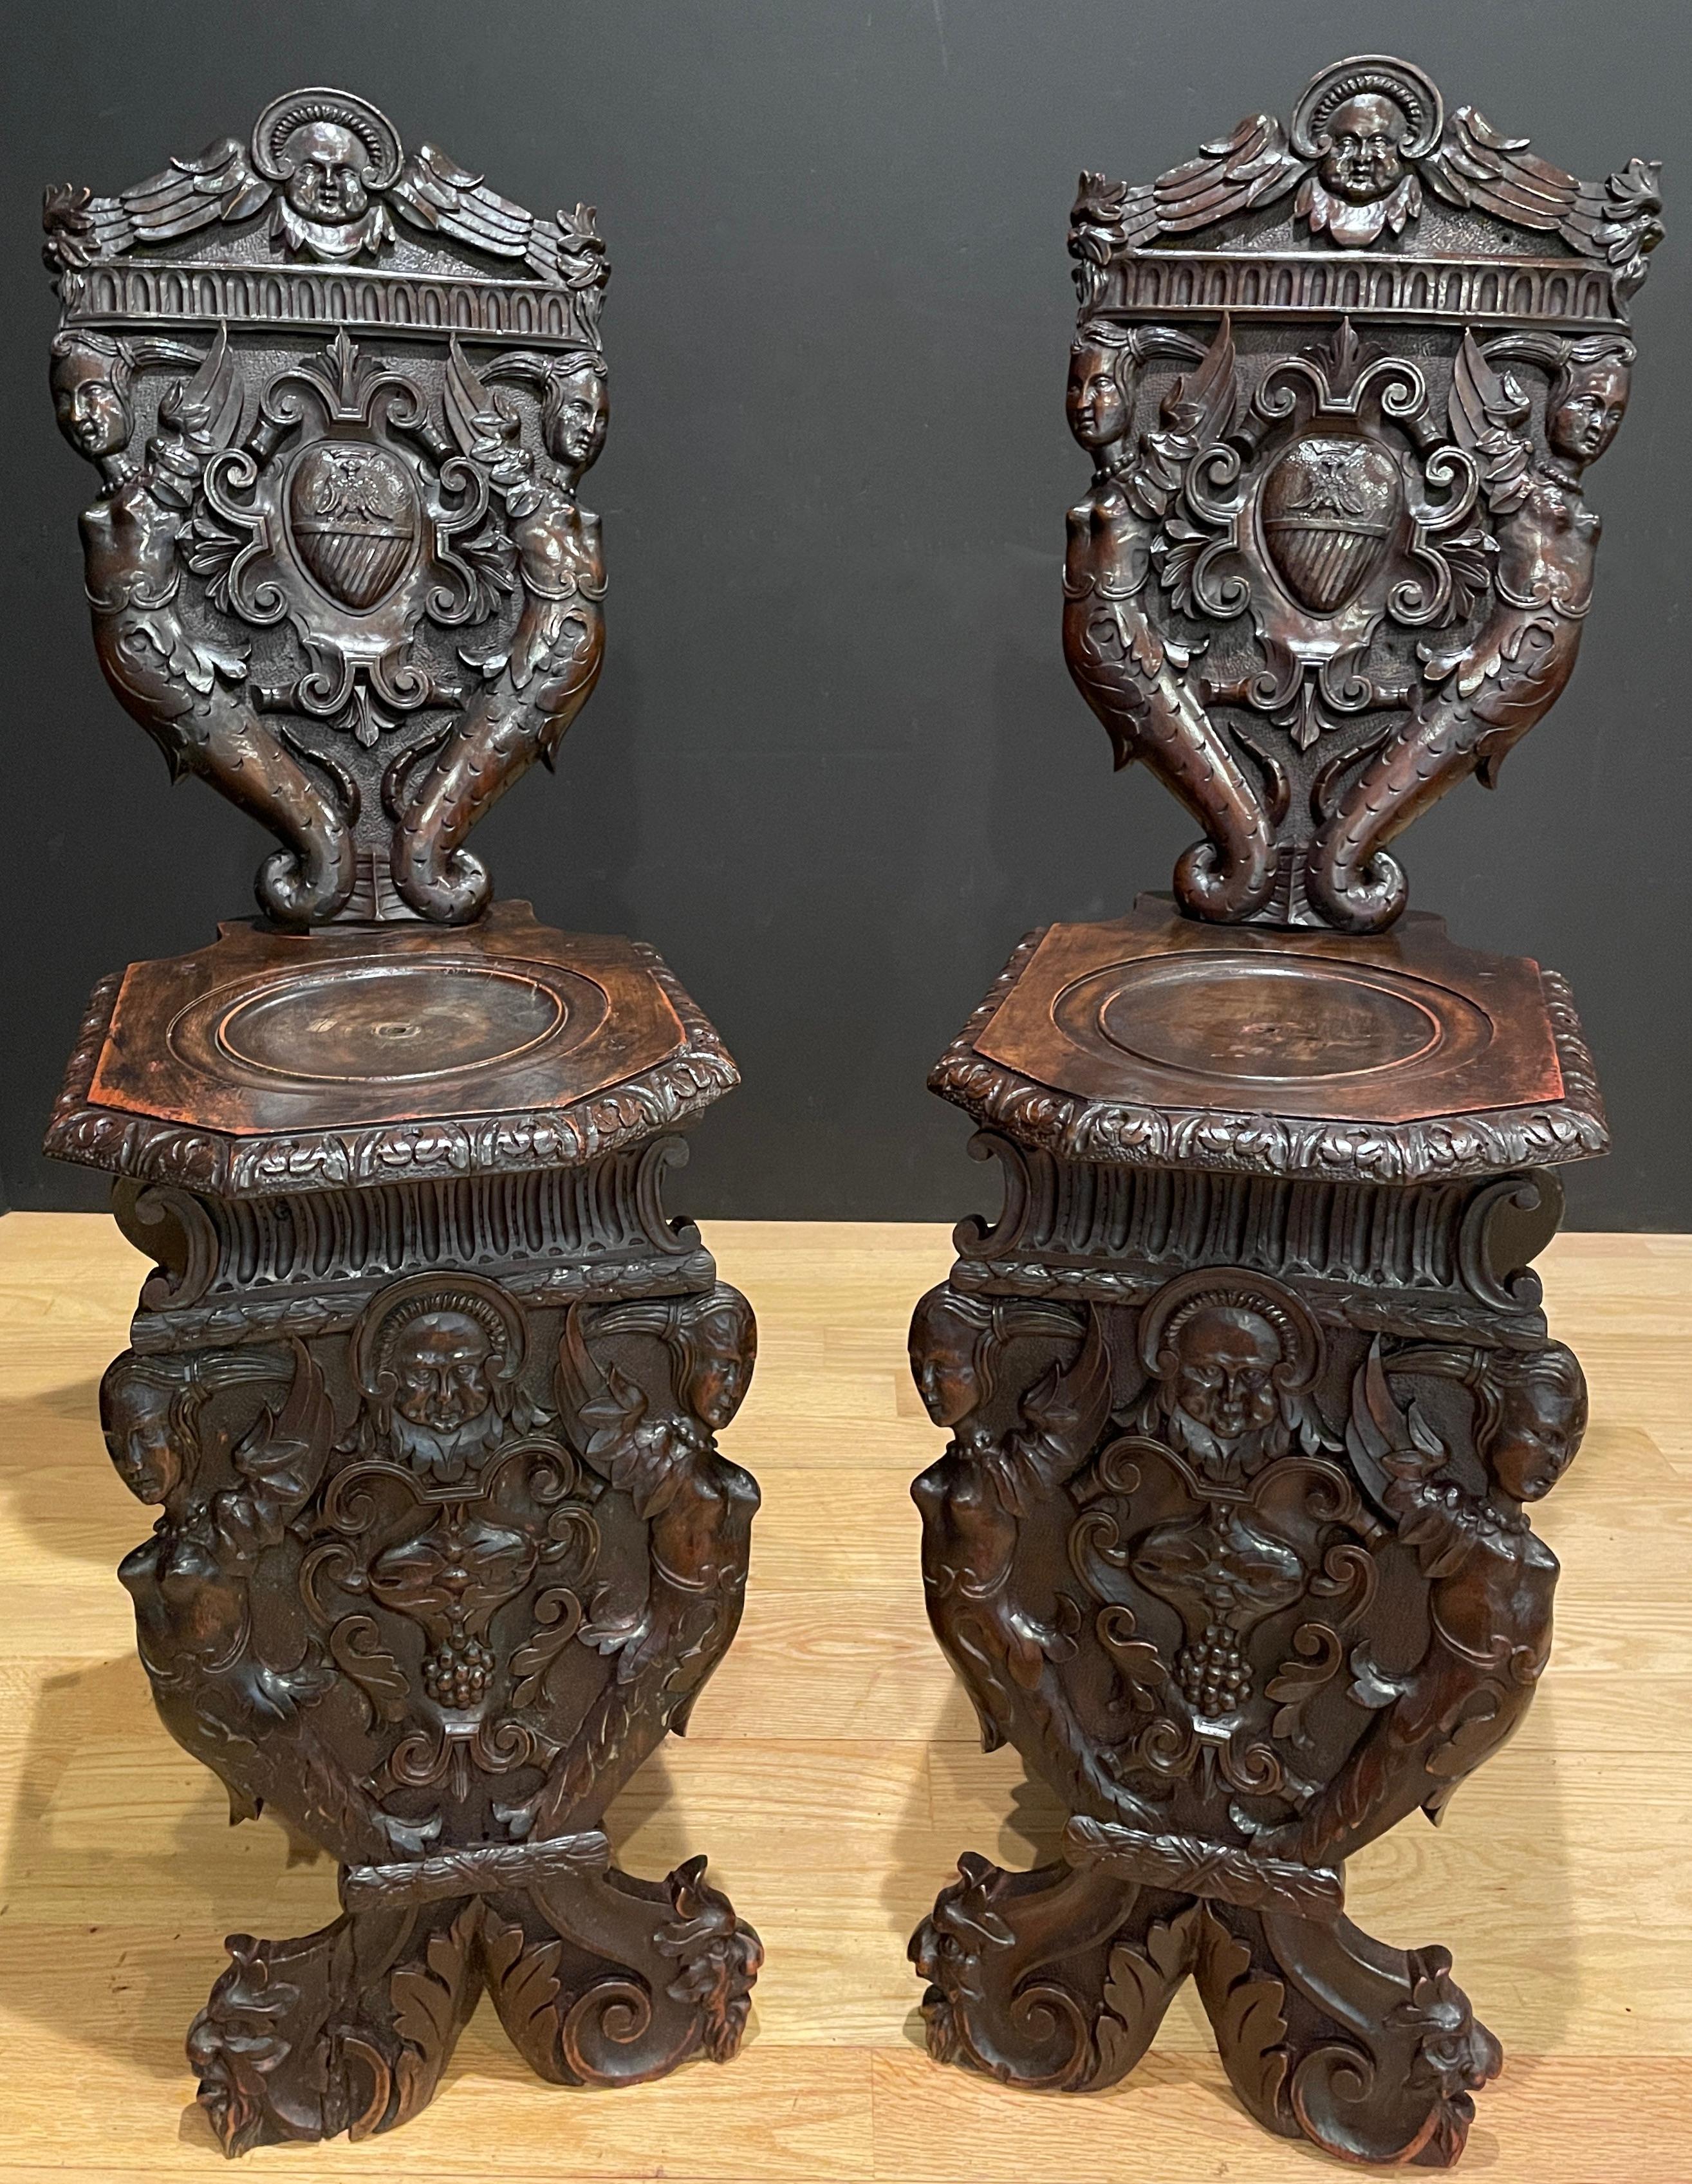 Antique pair of figural heavily carved walnut sgabello chairs. 
Winged figures and baroque designs.
The sgabello is a type of chair or stool with carved and often elaborately ornamented wood legs and back. The form originated in Renaissance Italy,